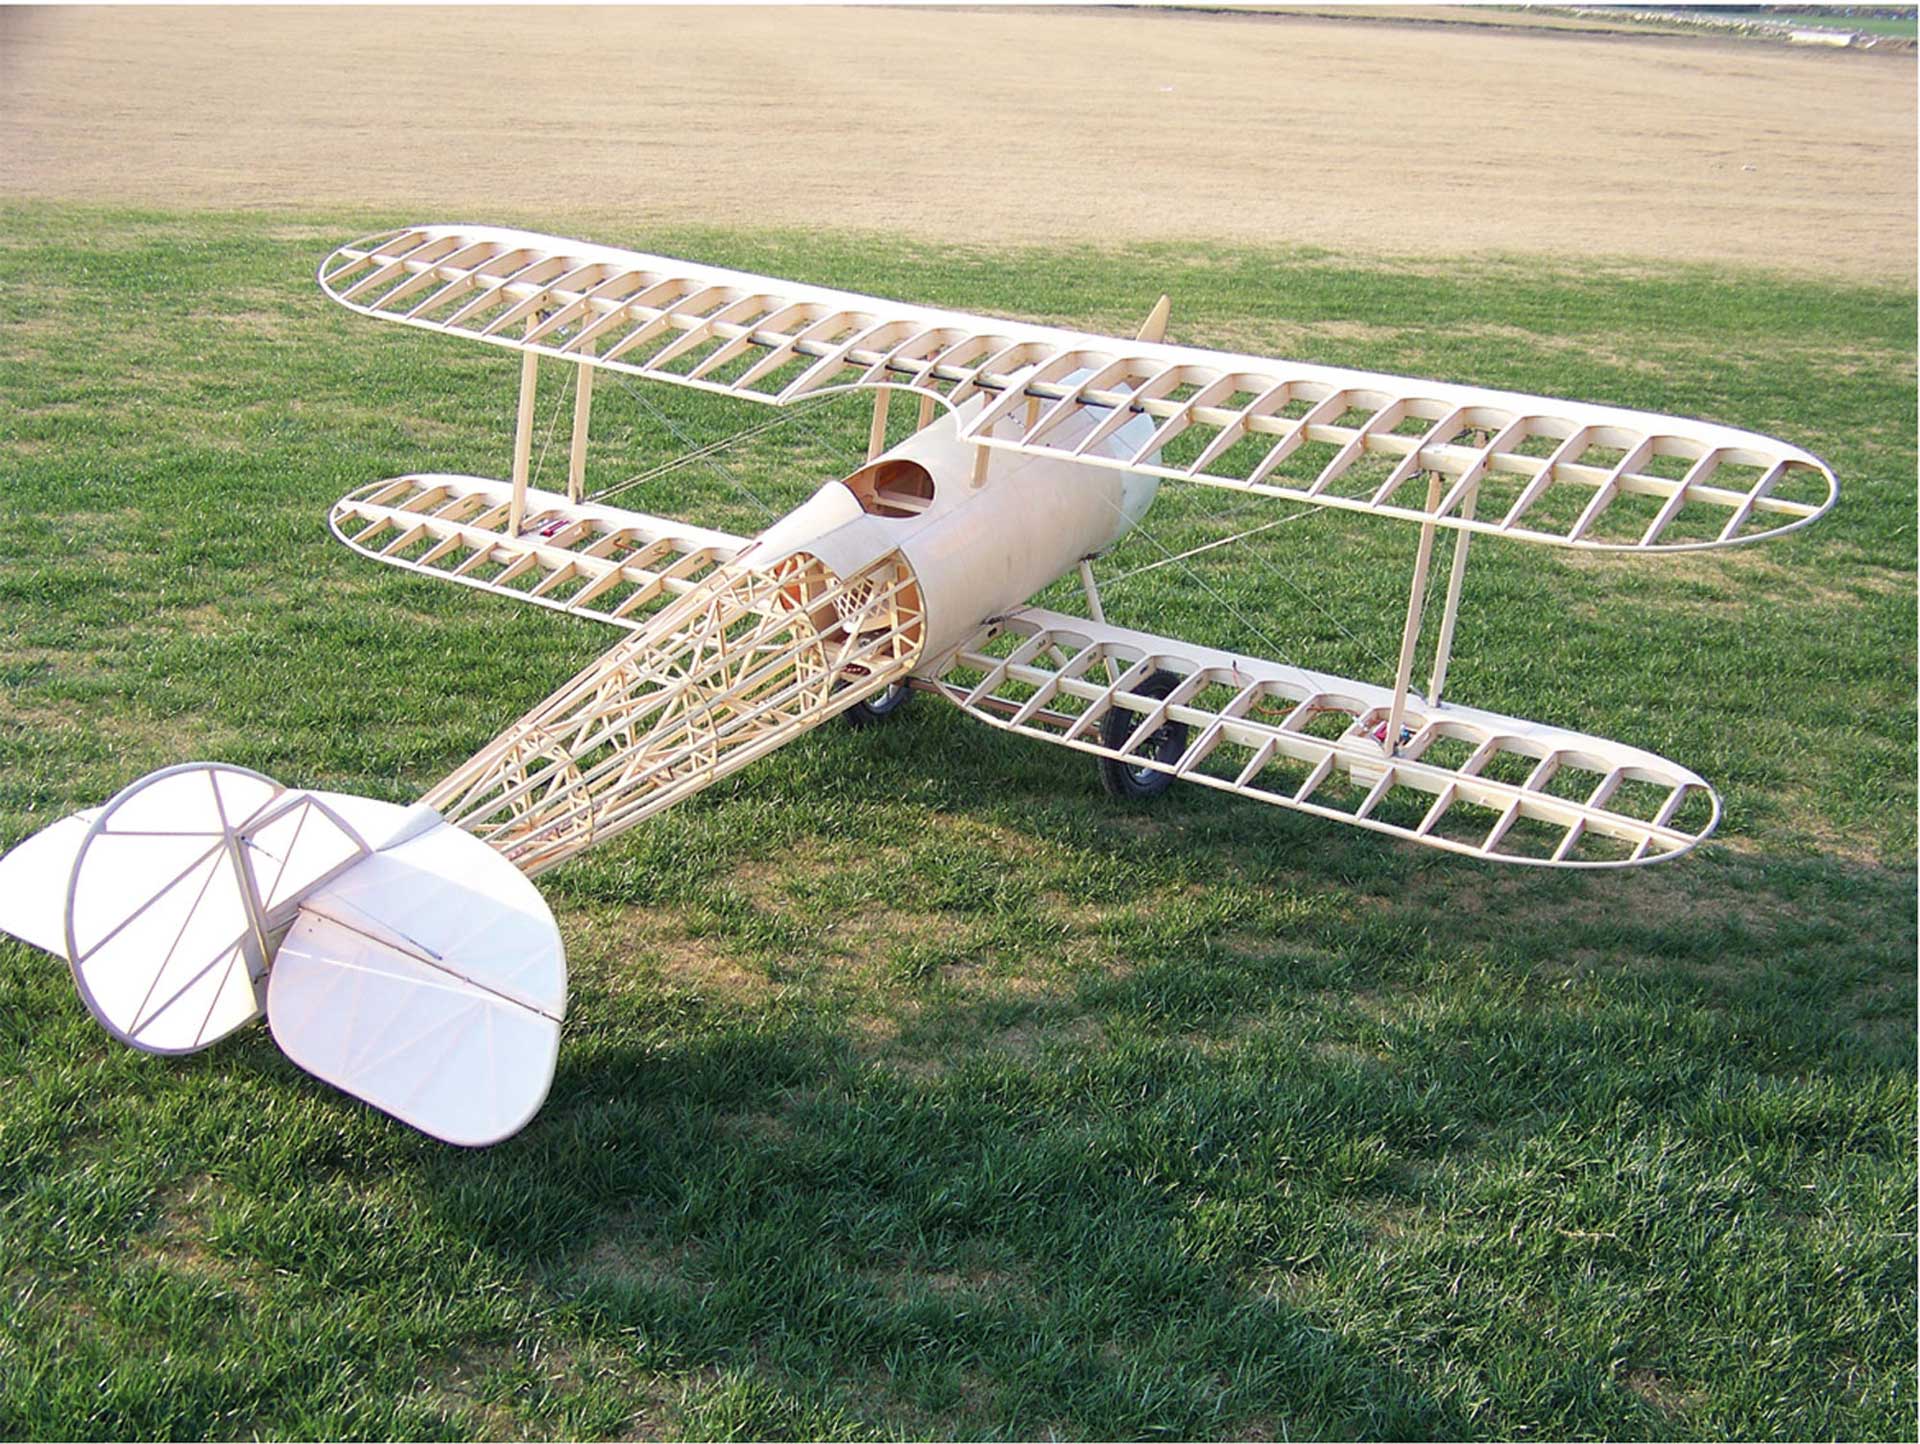 VALUEPLANES NIEUPORT 28 WOODEN KIT 1:3 2,8M WITH METAL FITTINGS AND GFK HOOD